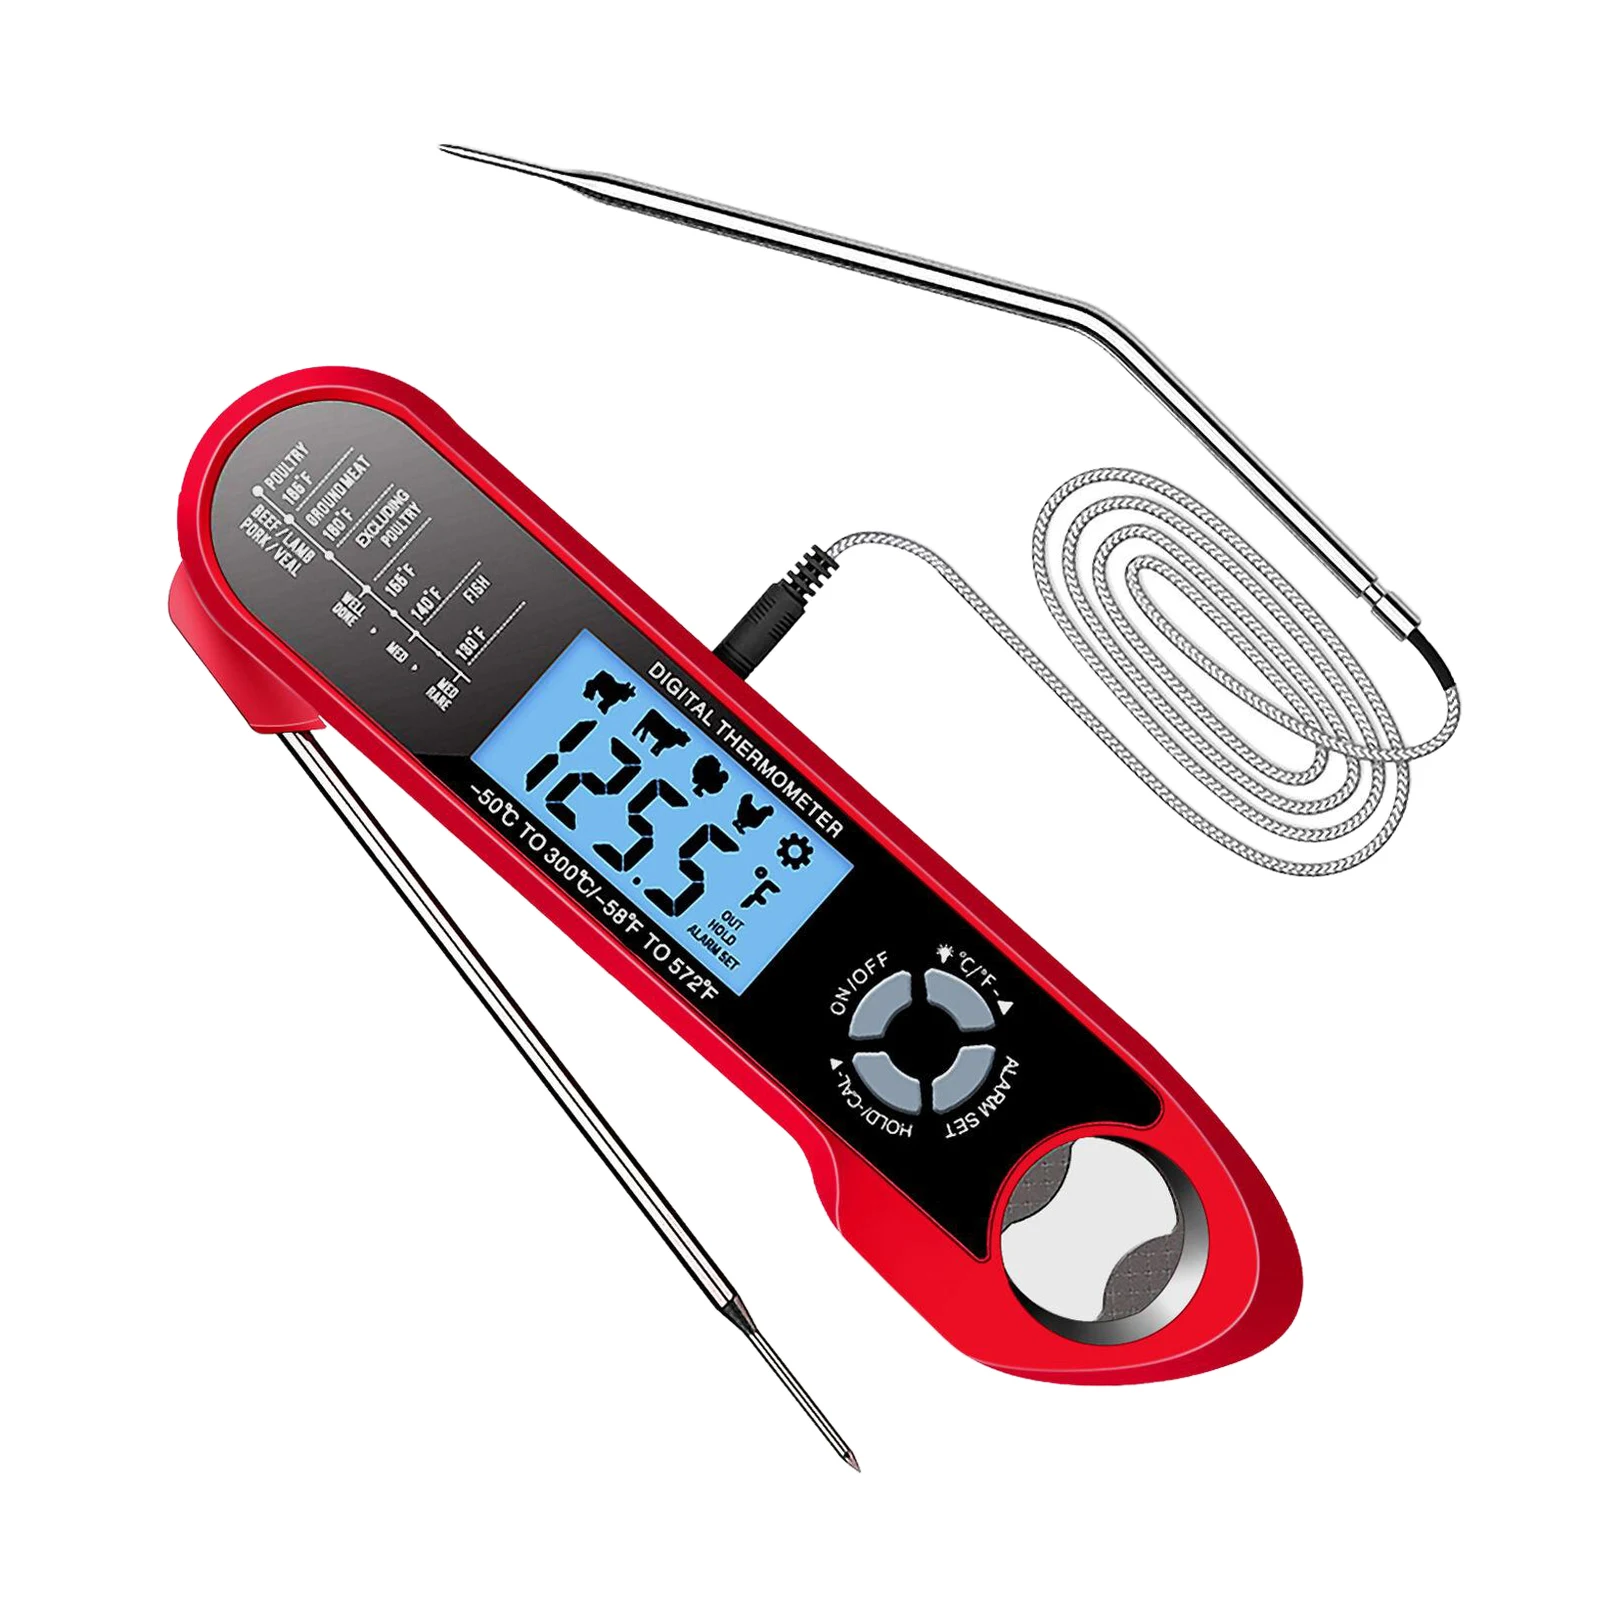 

Digital Food Thermometer Instant Read Meat Thermometer for Cooking, Grilling, Smoking, Baking, Turkey, Milk with Dual Probe